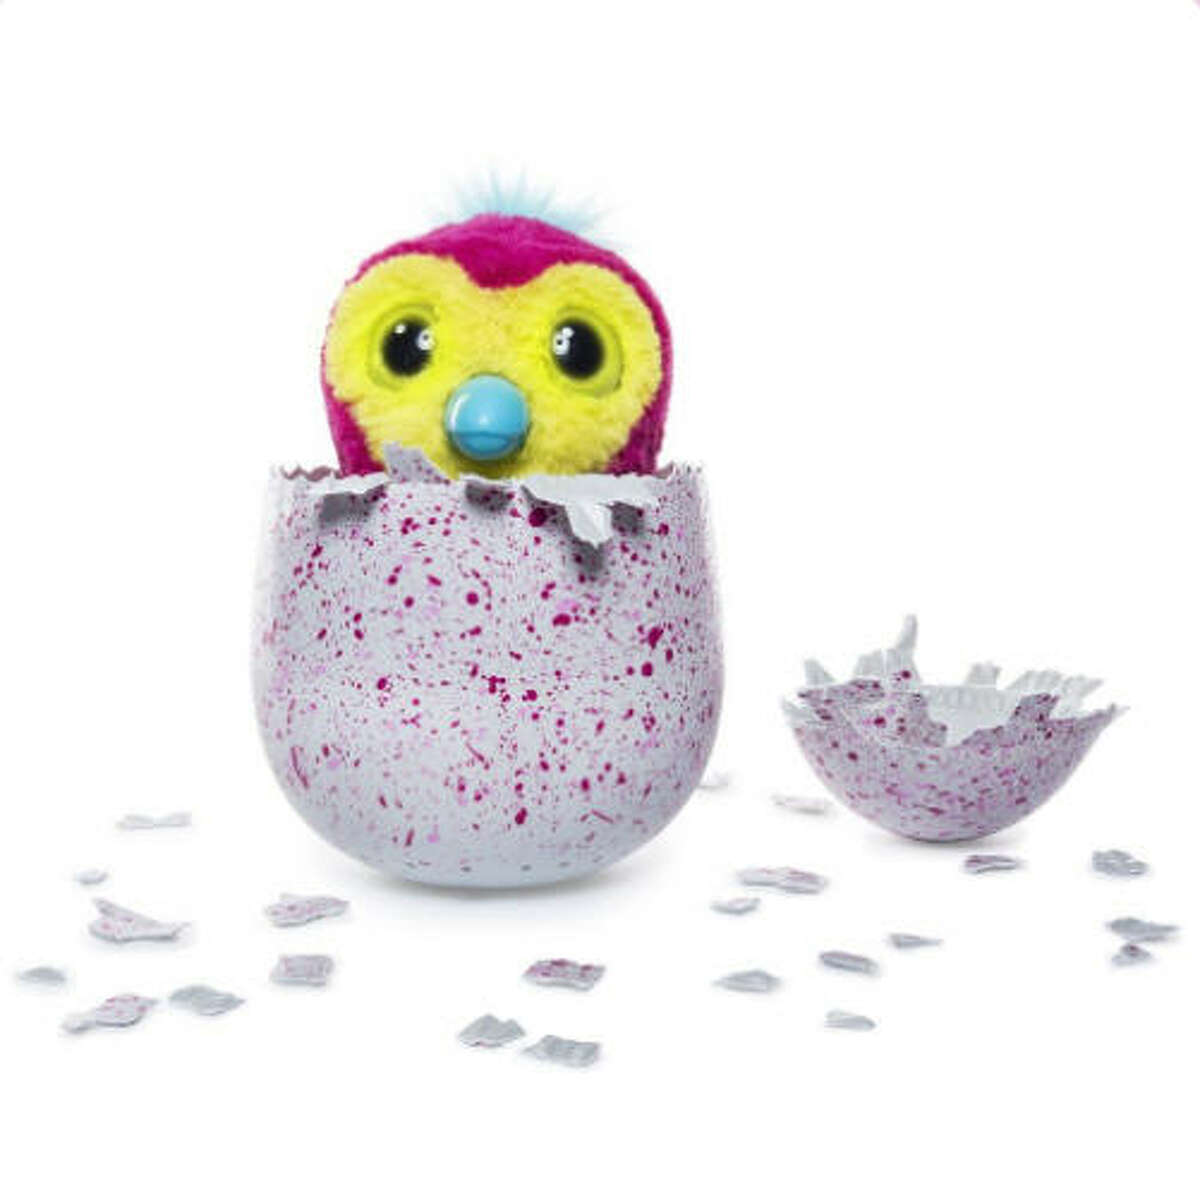 The toy This year's toy that's insanely highly sought is a Hatchimal. Basically, someone hatches their own egg and a toy comes out to play with.